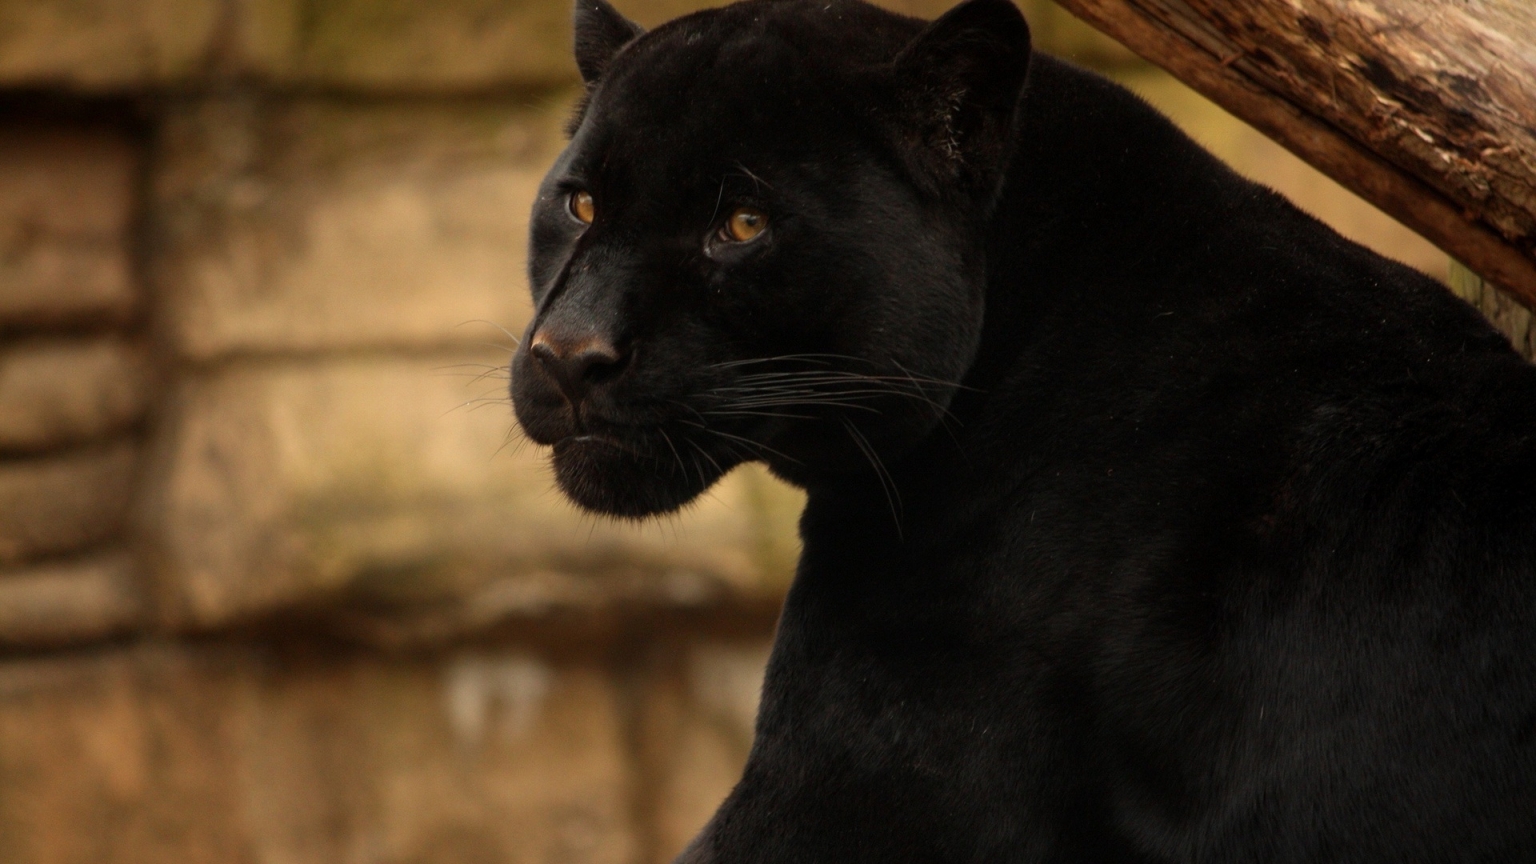 Beautiful Black Panther for 1536 x 864 HDTV resolution